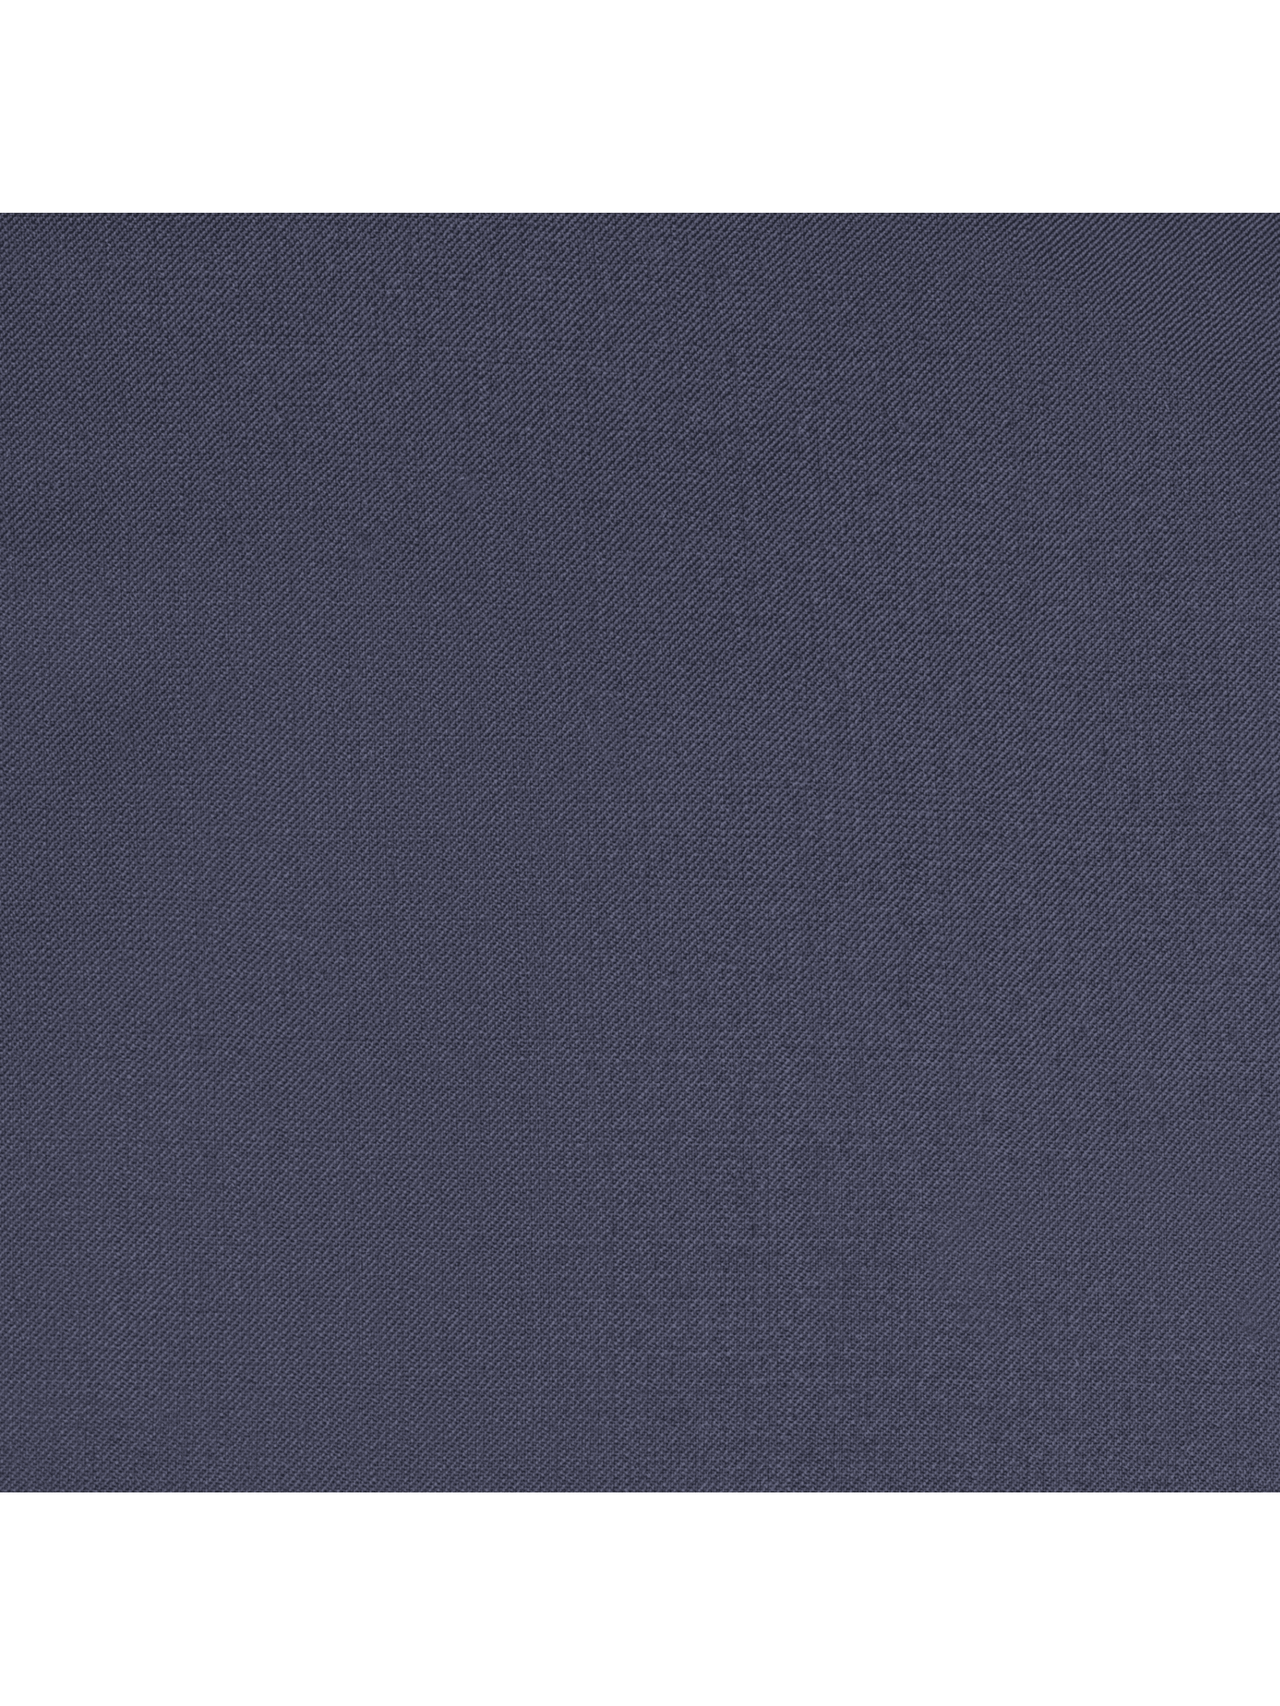 close up of navy blue 100% wool suit fabric